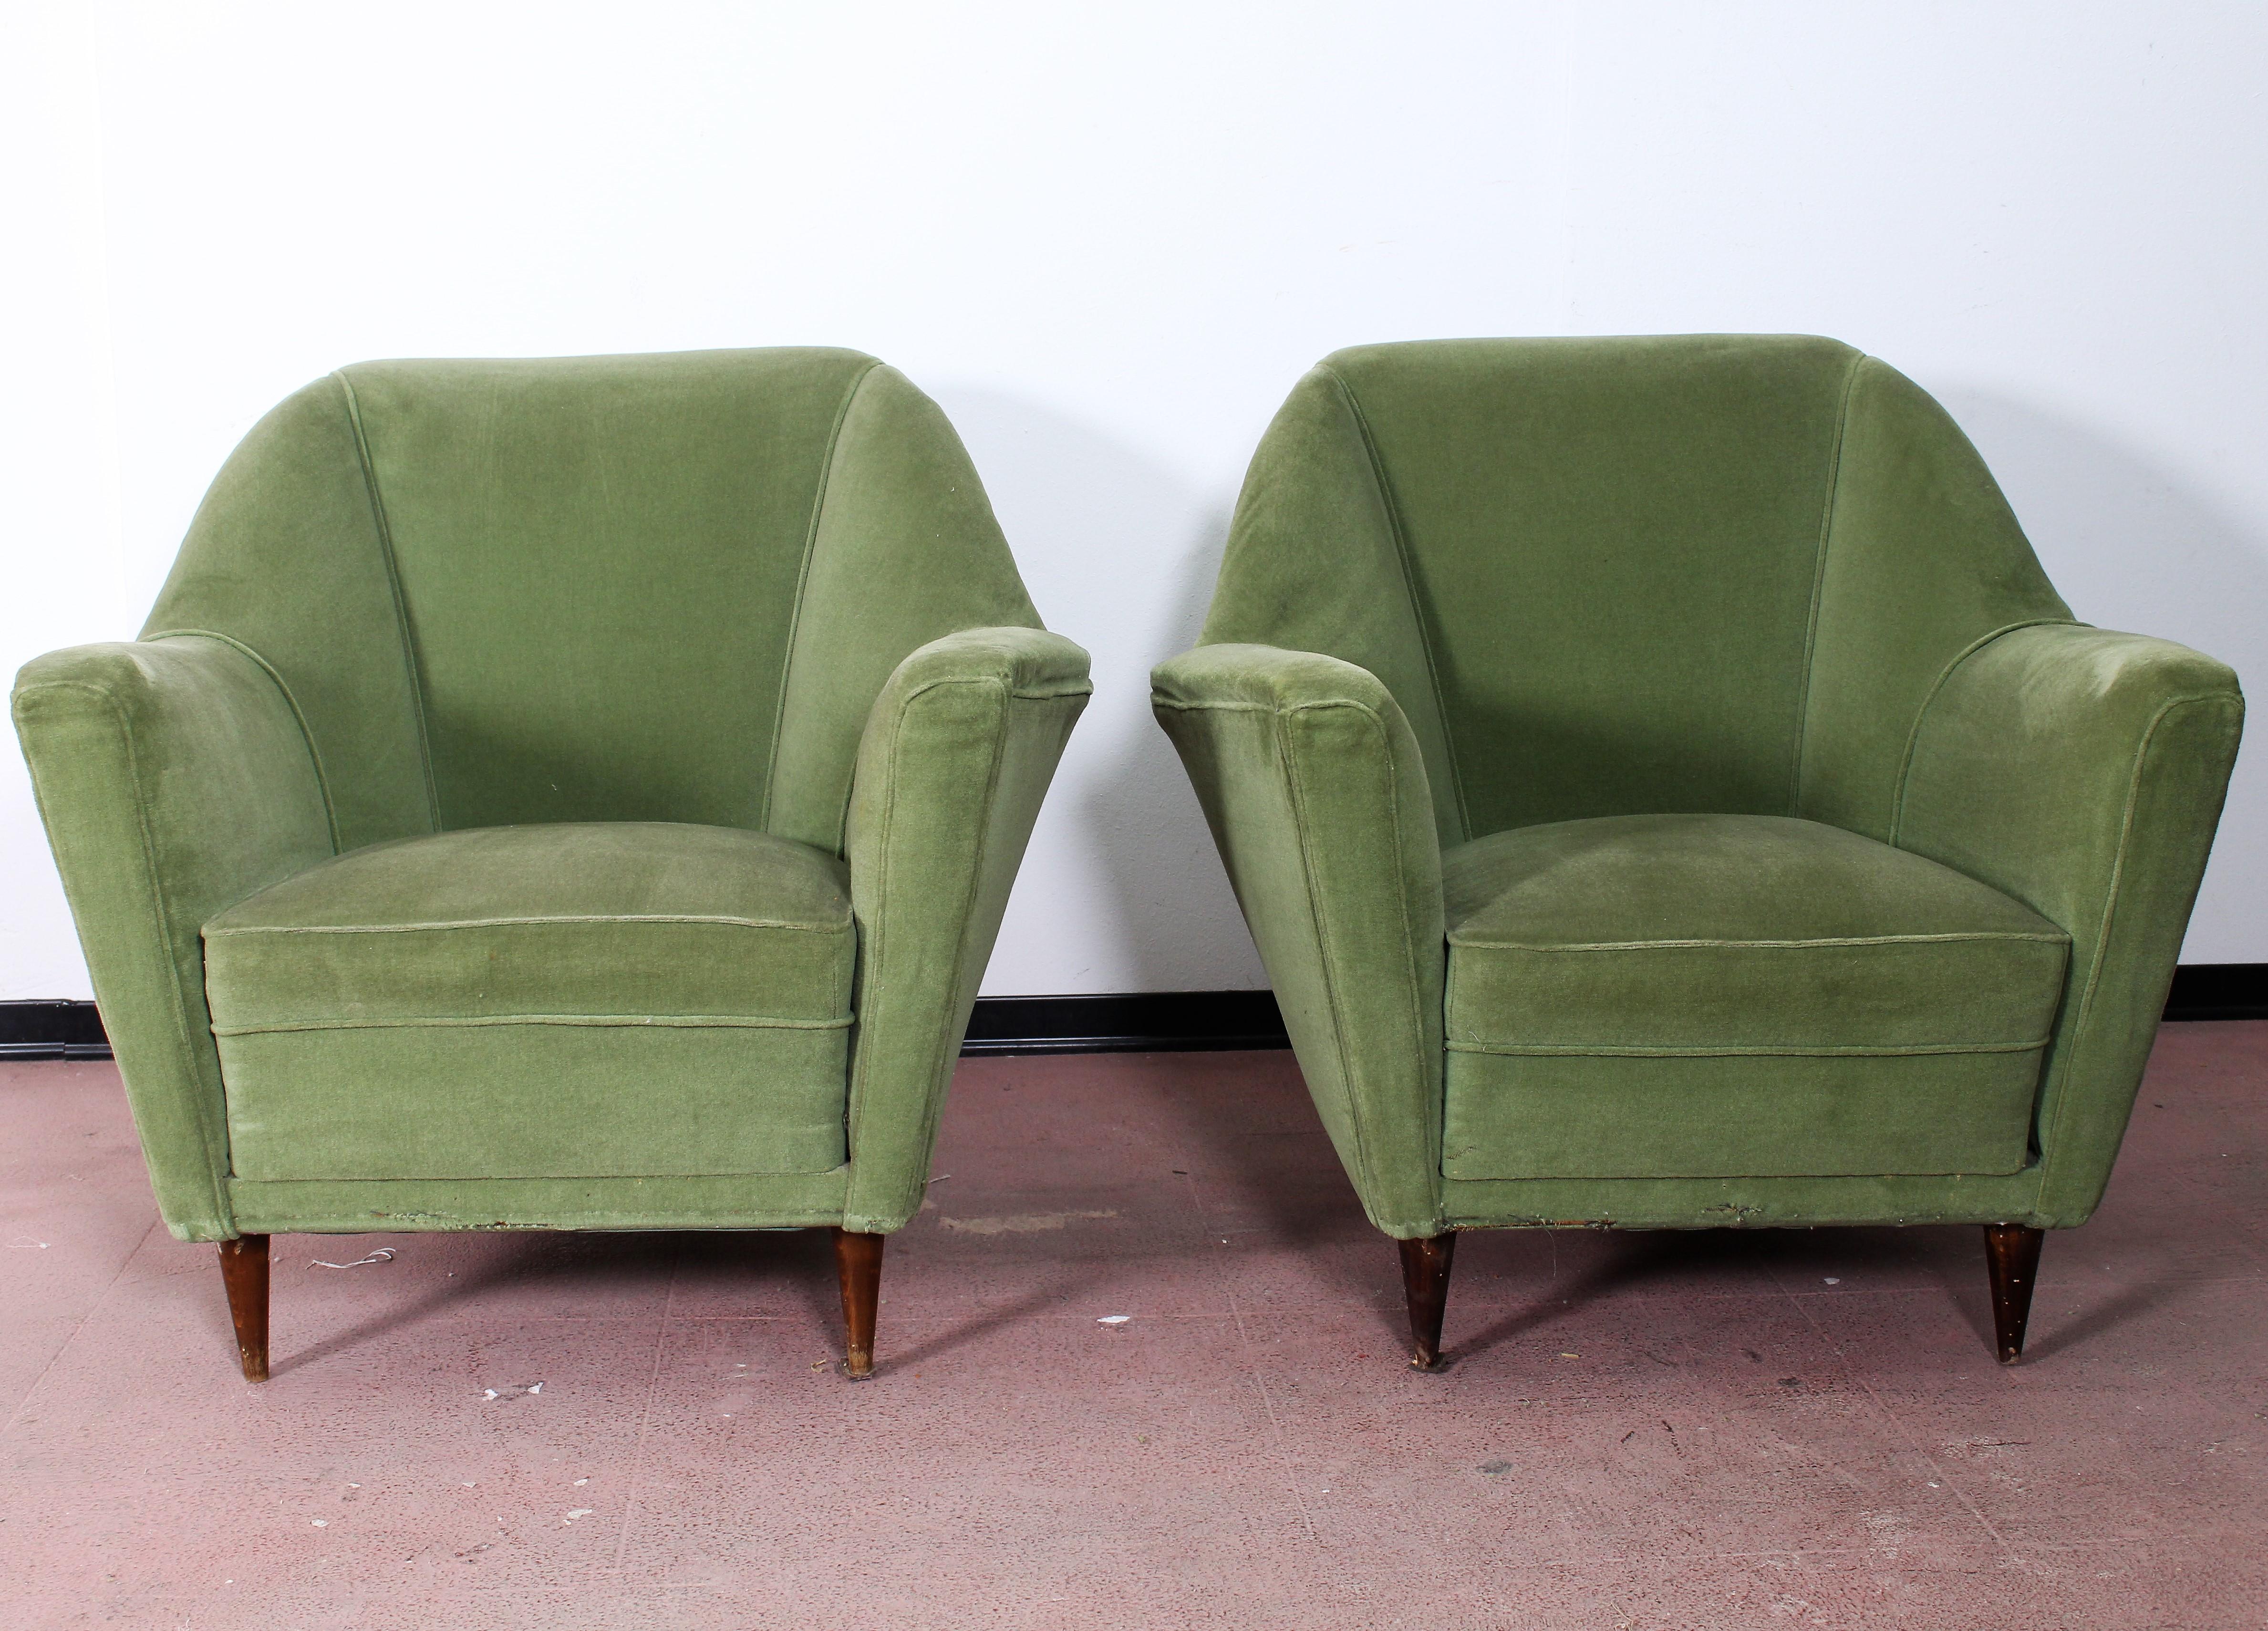 A pair of I.S.A. armchairs with a wooden structure and fabric upholstery, 1950
Shows light scratches and wear from previous use but remains in fair condition.
Wear consistent with age and use.
